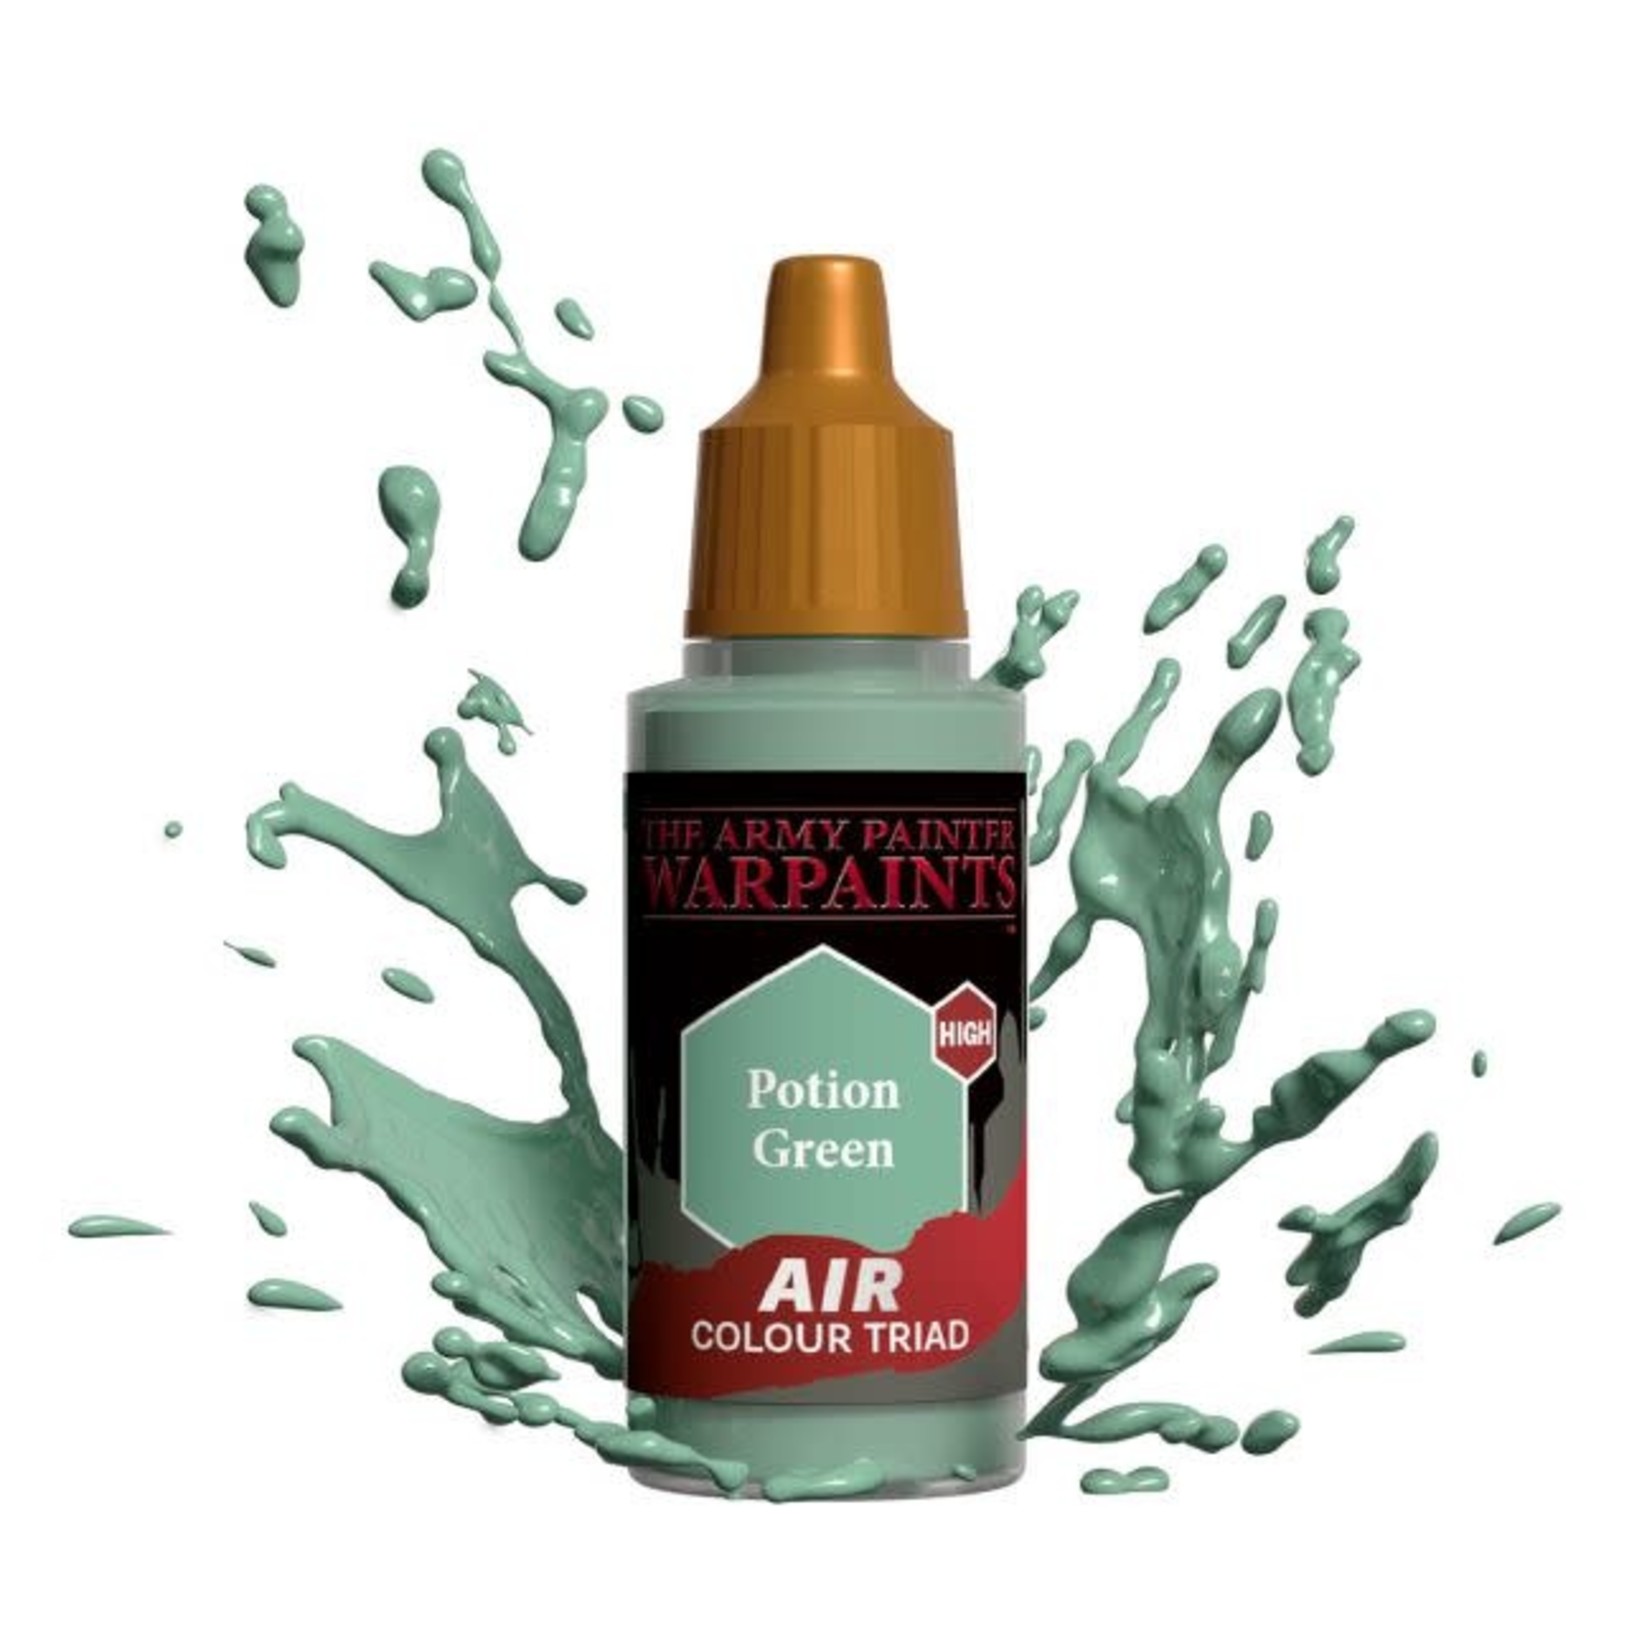 Army Painter Warpaints Air: Potion Green 18ml